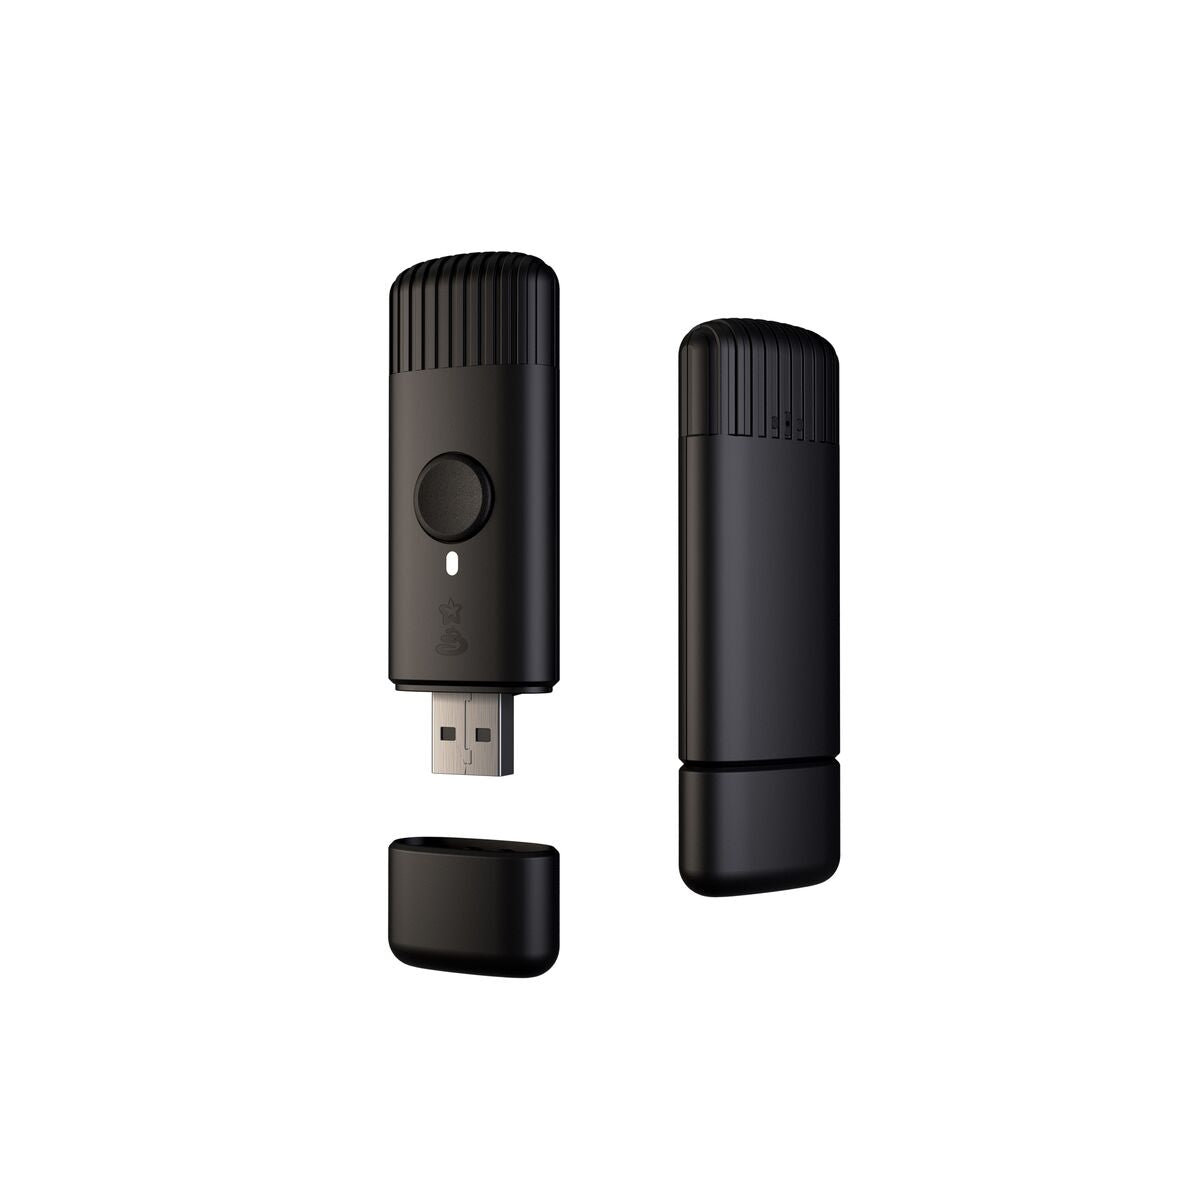 TWINKLY MUSIC - USB-Powered Wi-Fi Music-Player Dongle - Compatible with Gen II - Black